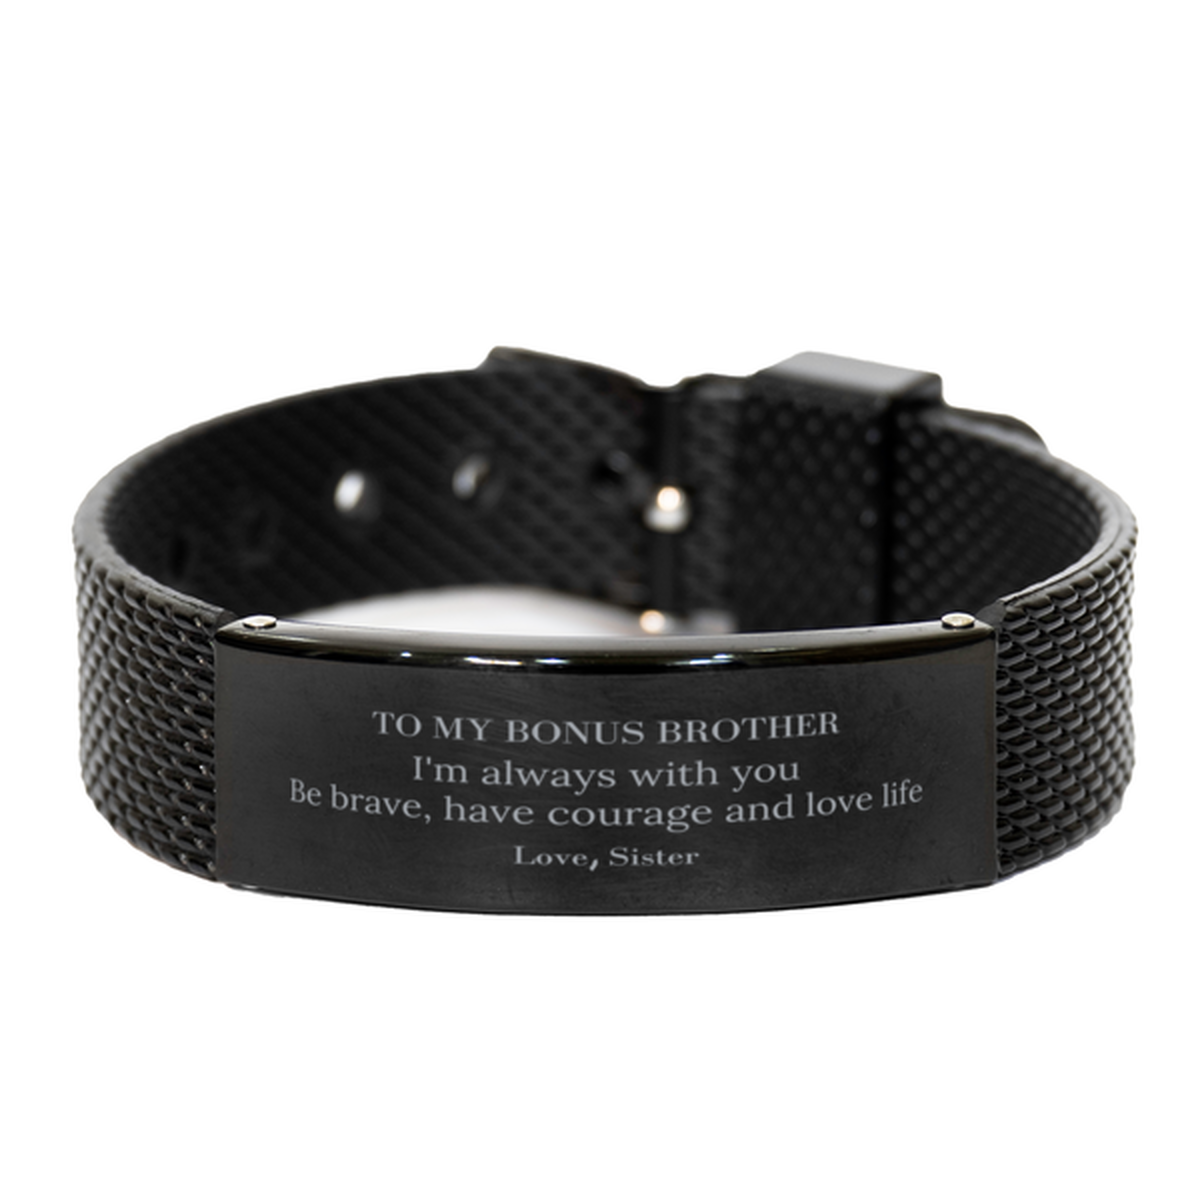 To My Bonus Brother Gifts from Sister, Unique Black Shark Mesh Bracelet Inspirational Christmas Birthday Graduation Gifts for Bonus Brother I'm always with you. Be brave, have courage and love life. Love, Sister